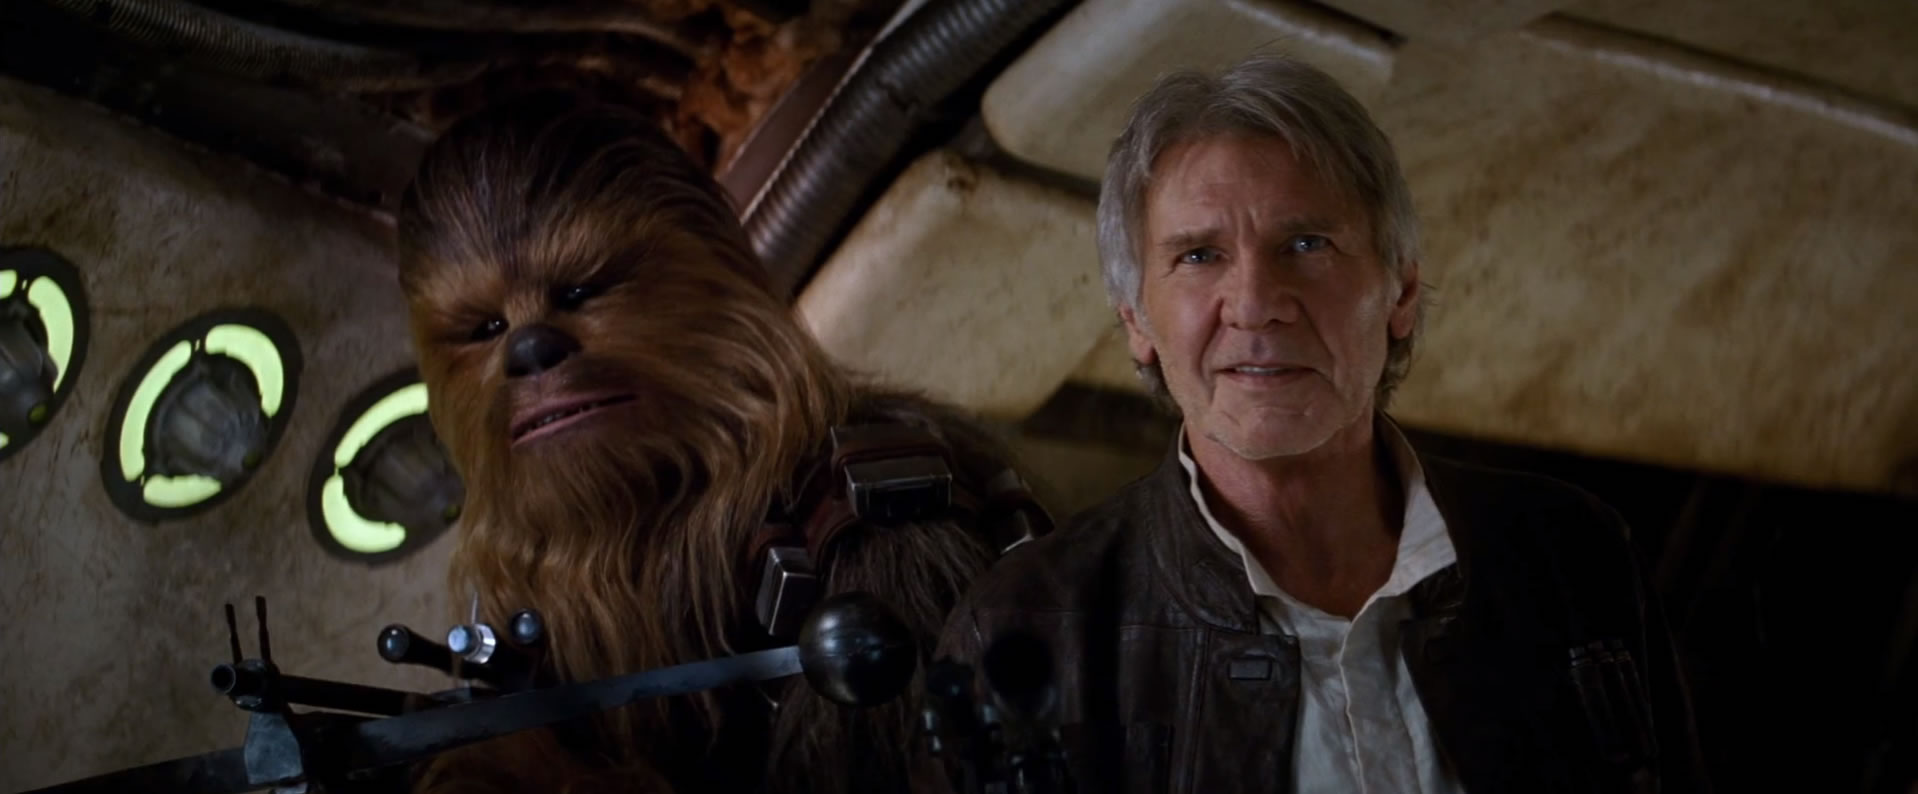 How Star Wars: The Force Awakens Is Already Looking Better Than The Prequel Trilogy